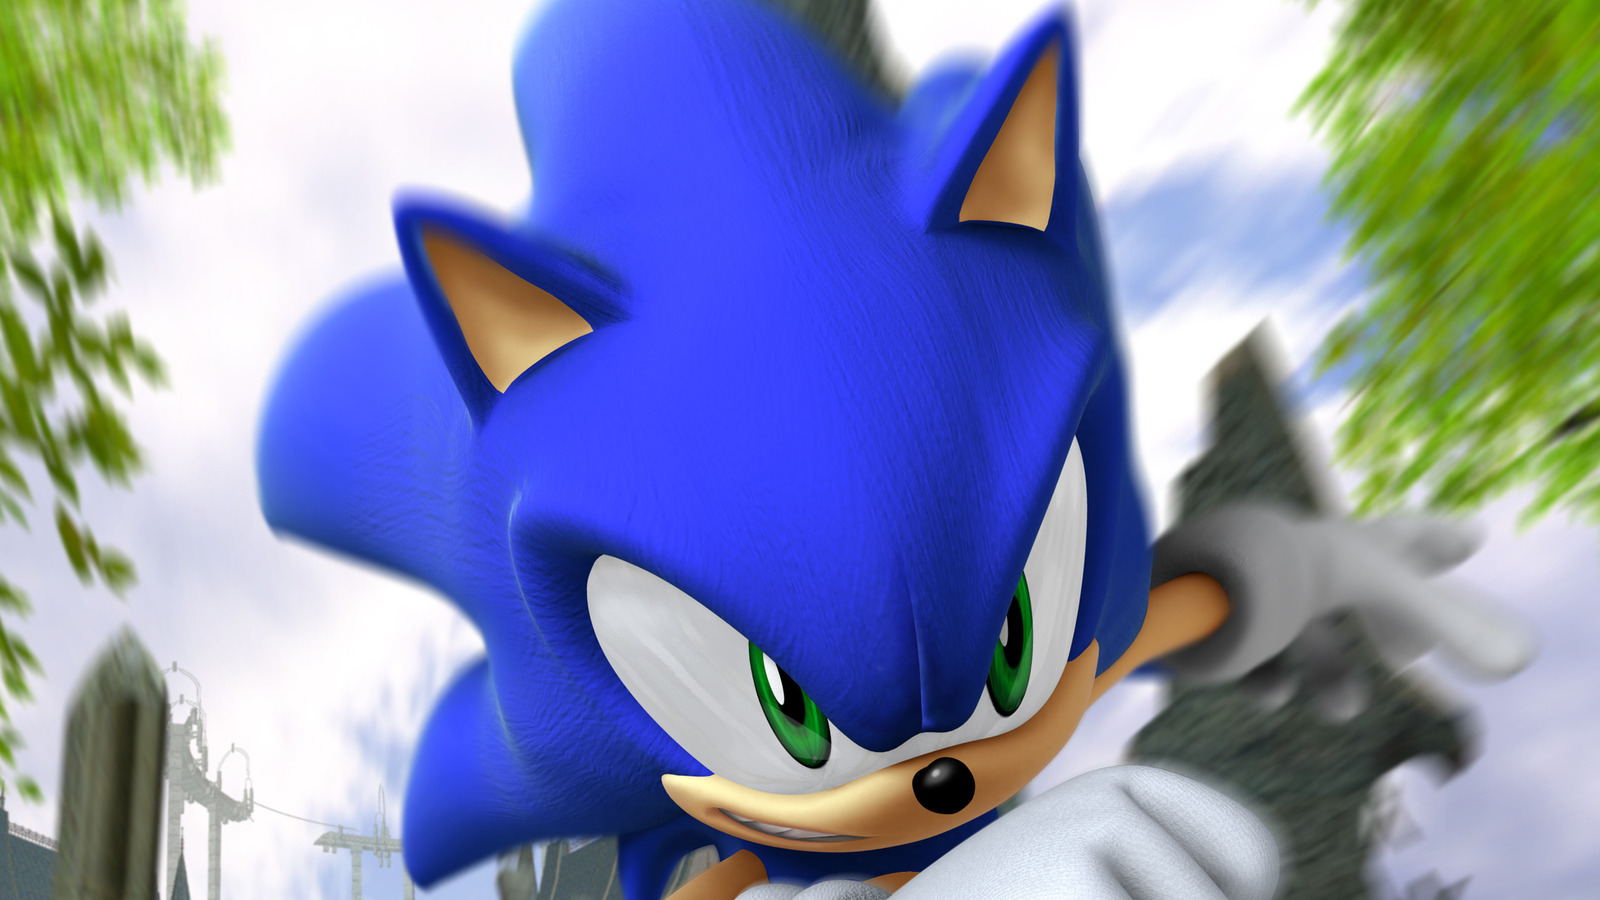 Sonic the Hedgehog 4: Episode 2 Due In the Near Future